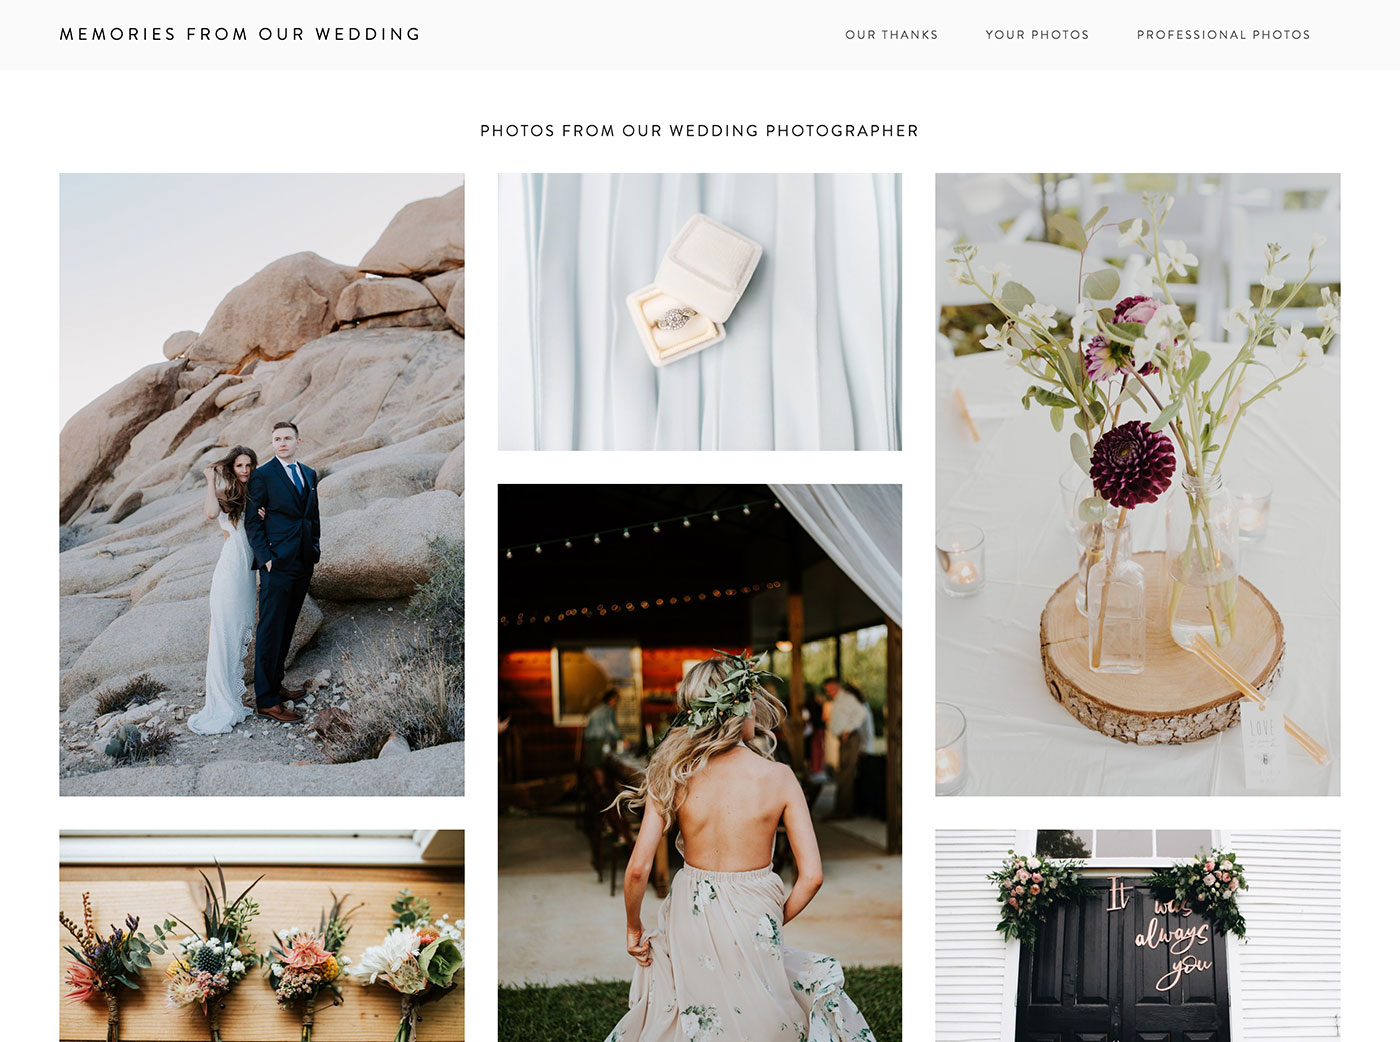 What to do with your wedding website after the wedding!